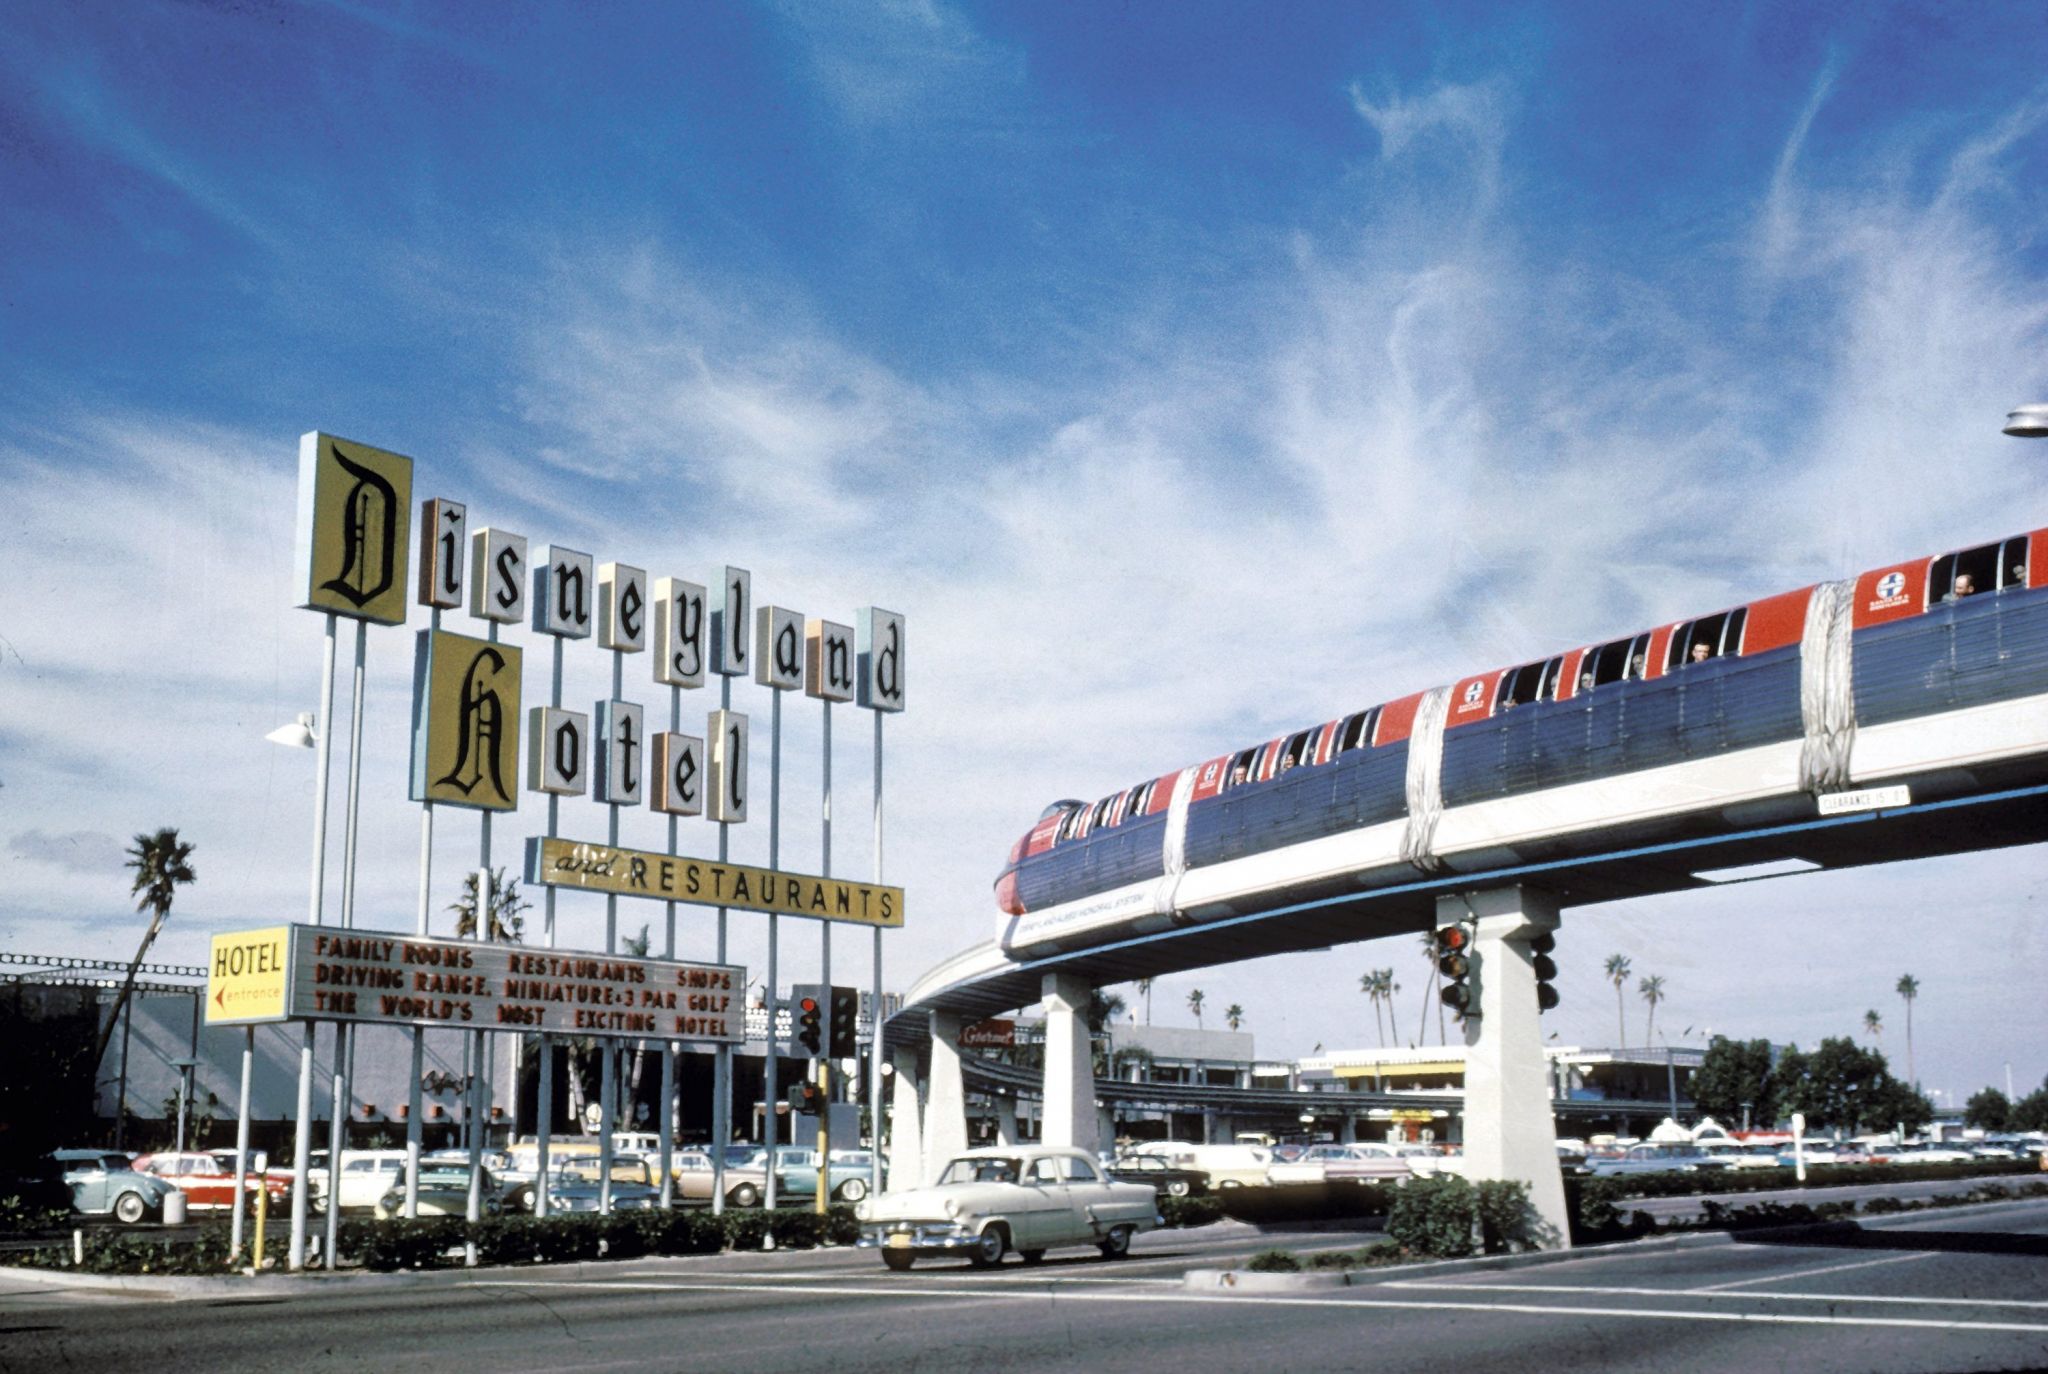 How the Disneyland Monorail changed transportation forever